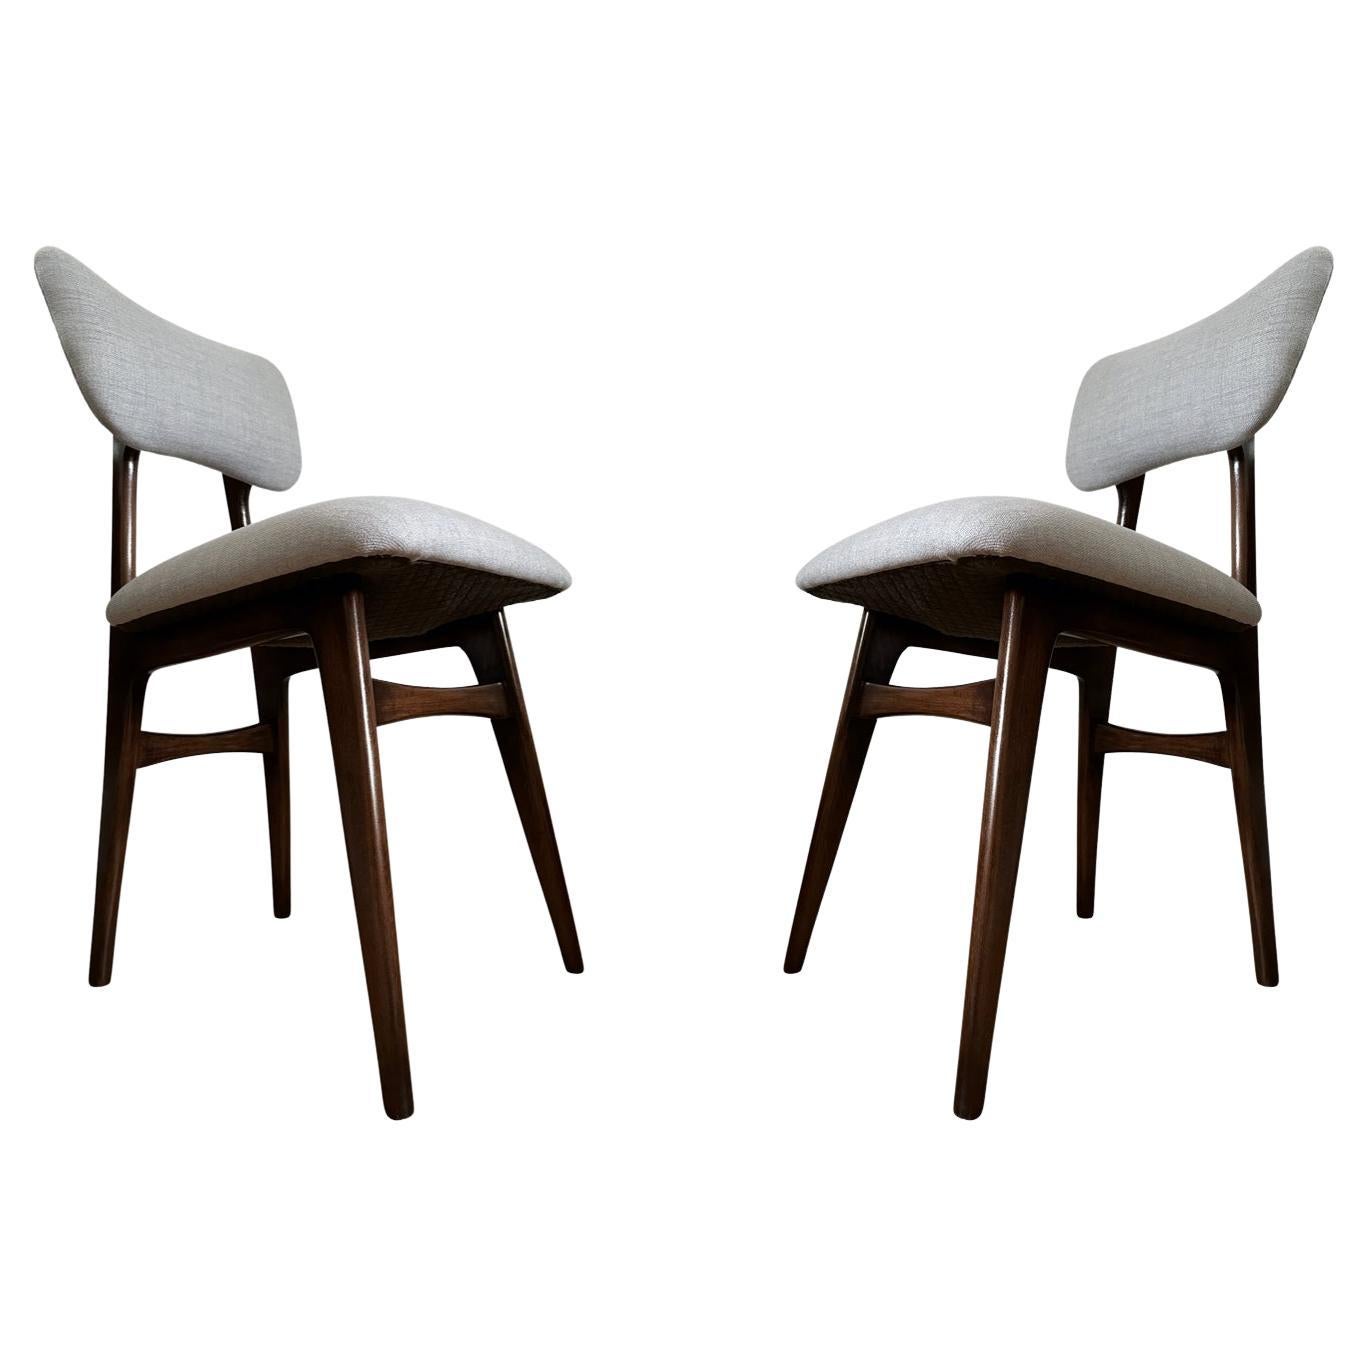 Set of 2 Midcentury Grey Dining Chairs, Europe, 1960s